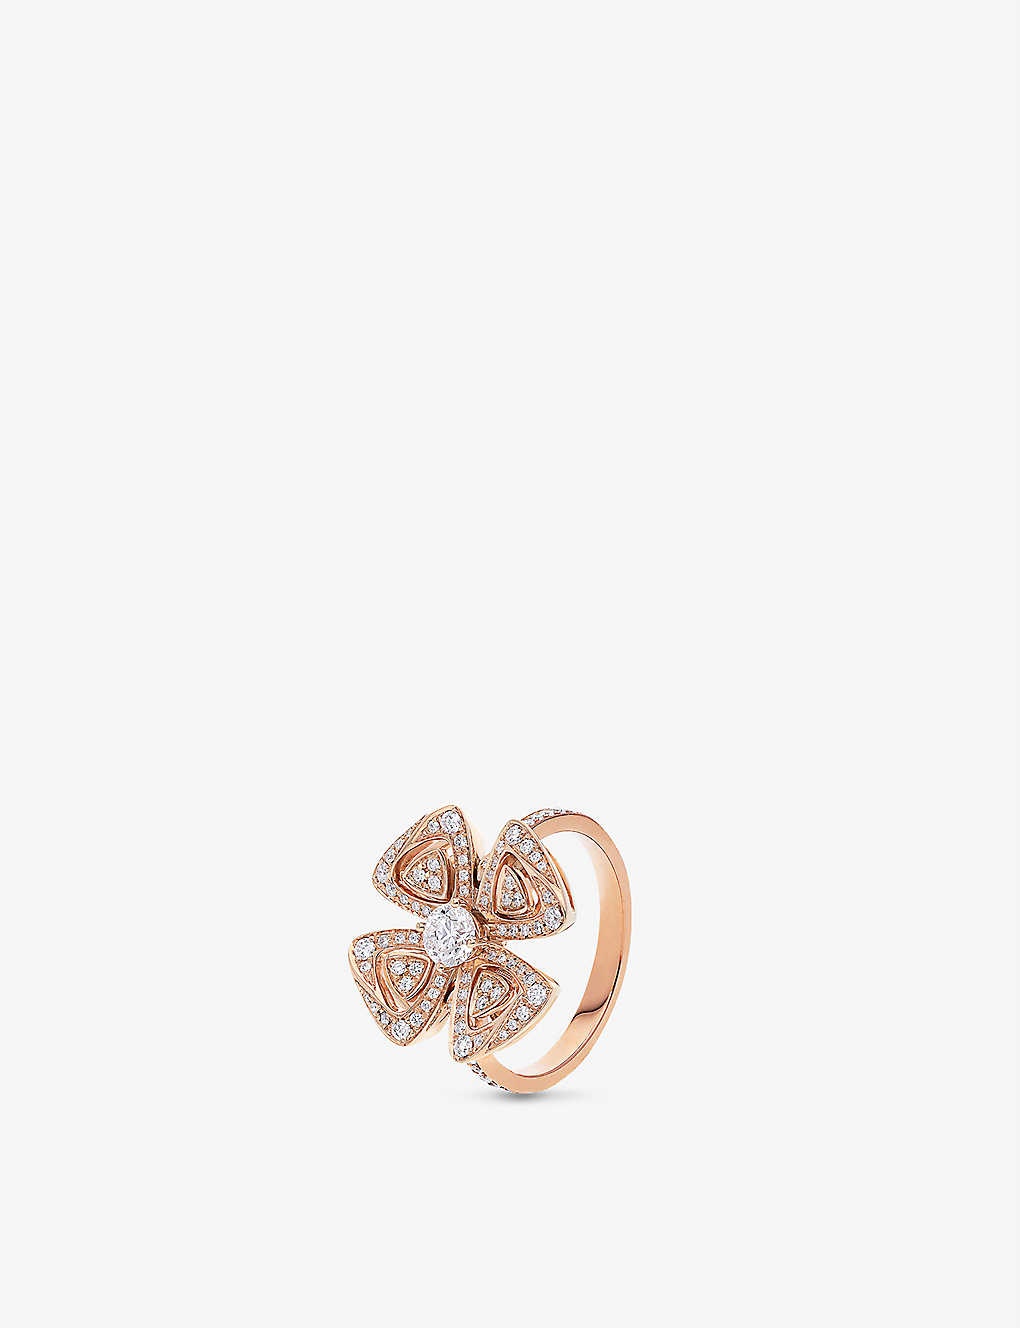 Fiorever 18ct rose gold and pavé diamond ring - 1